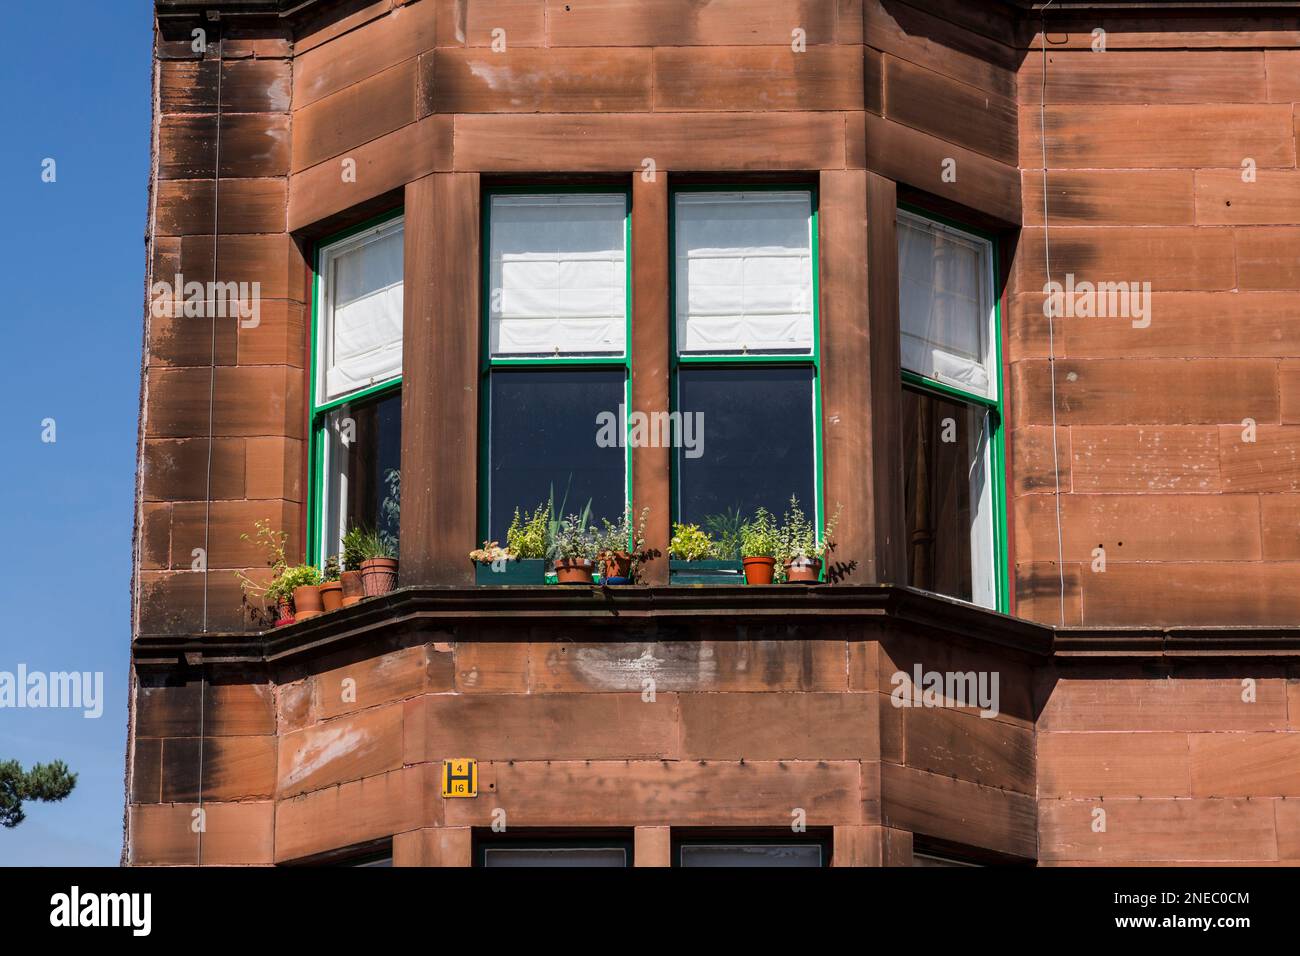 Plant pots on the window sill of a tenement building in summer, Glasgow, Scotland, UK, Europe Stock Photo